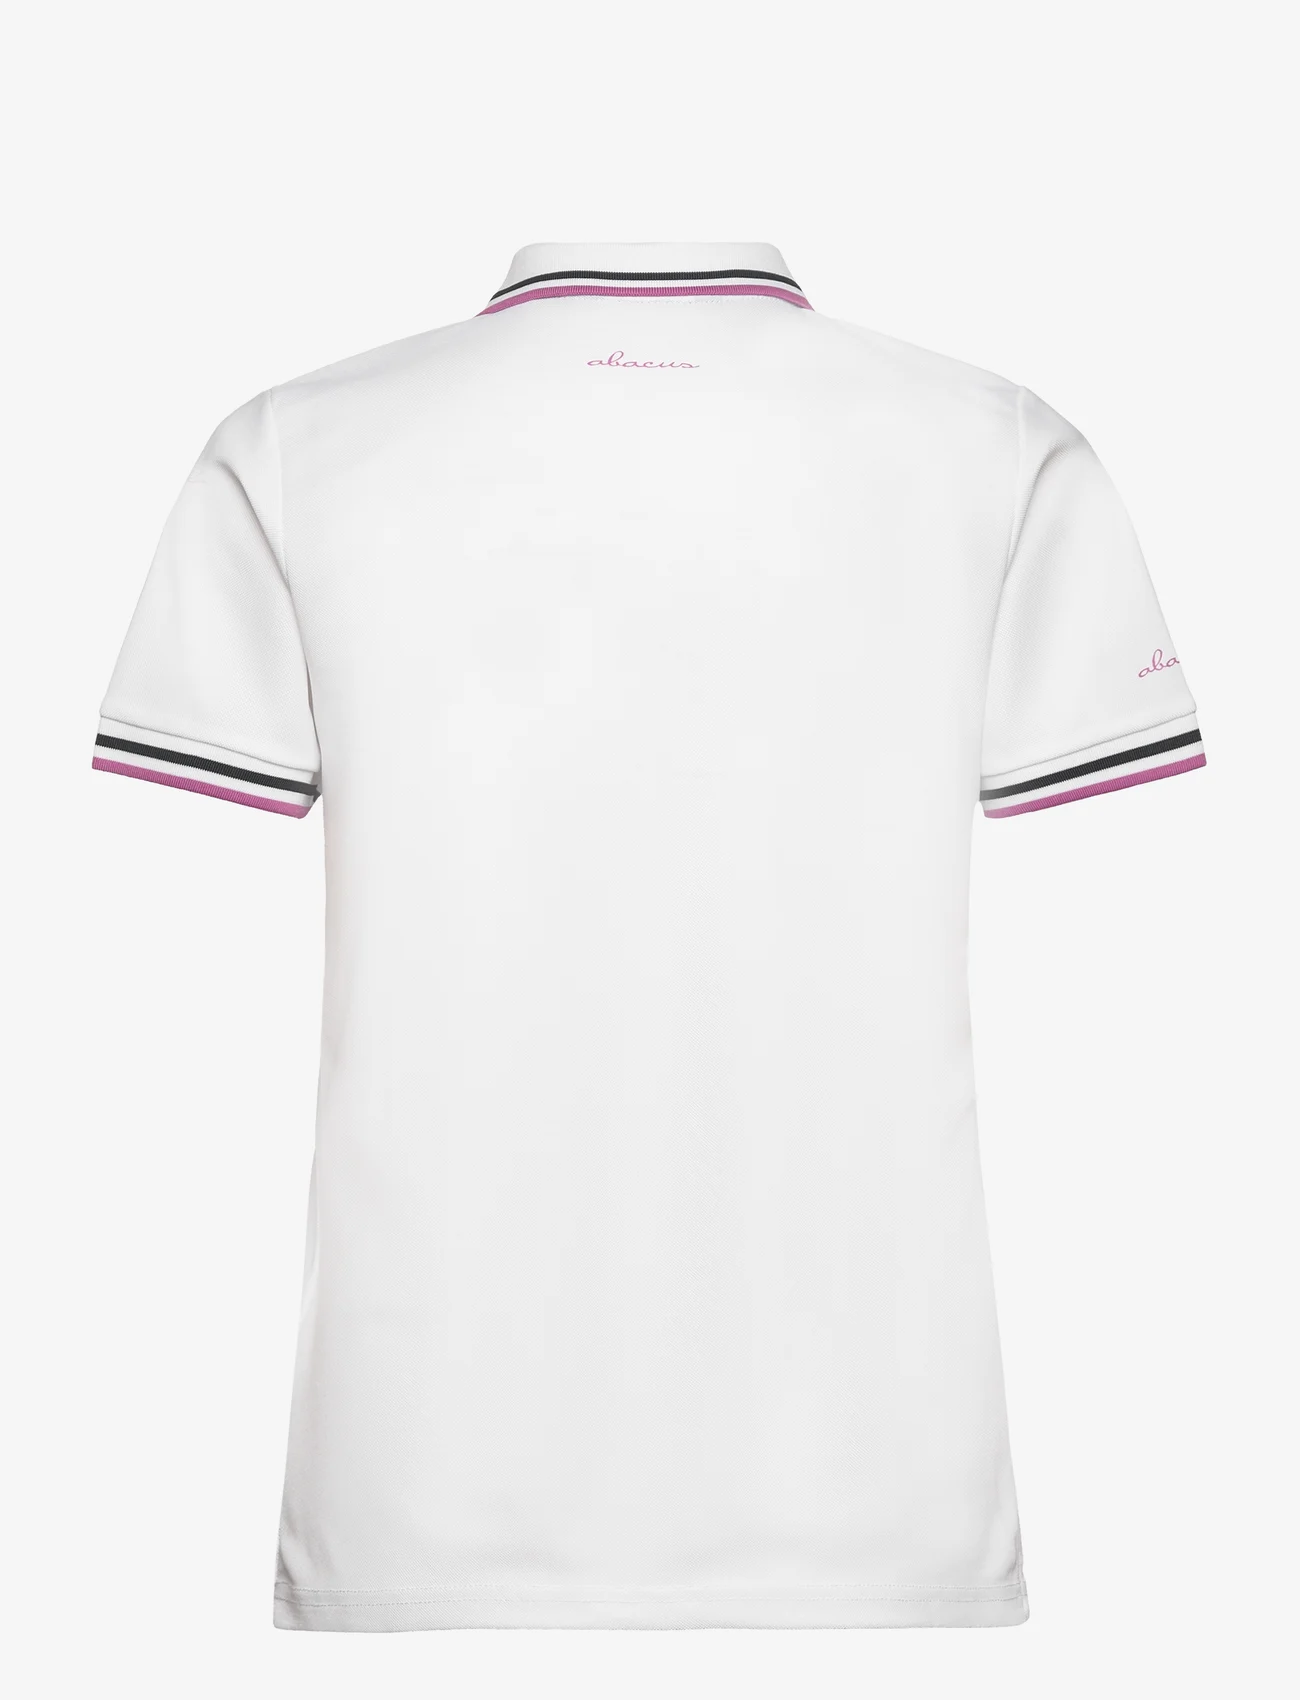 Abacus - Lds Pines polo - pikeepaidat - white - 1